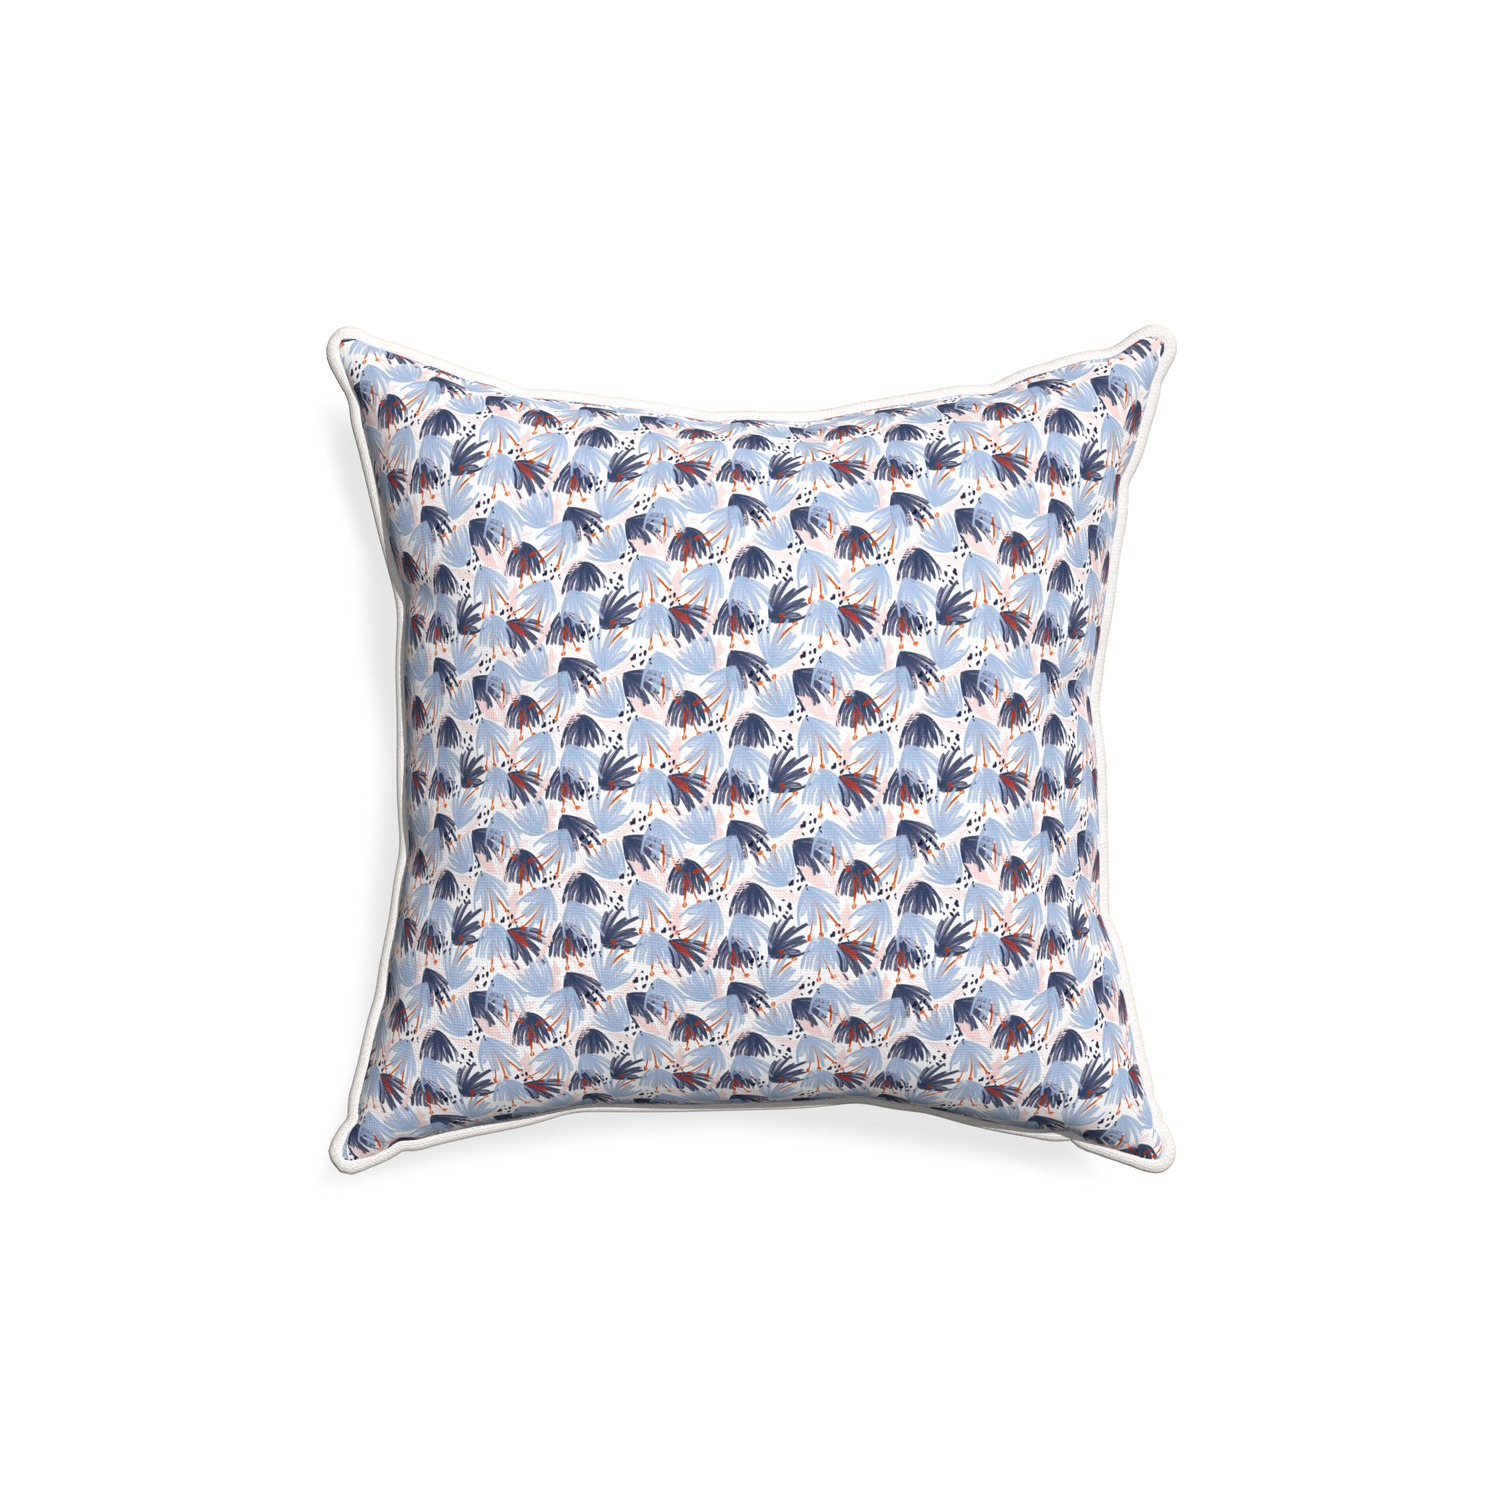 18-square eden blue custom pillow with snow piping on white background